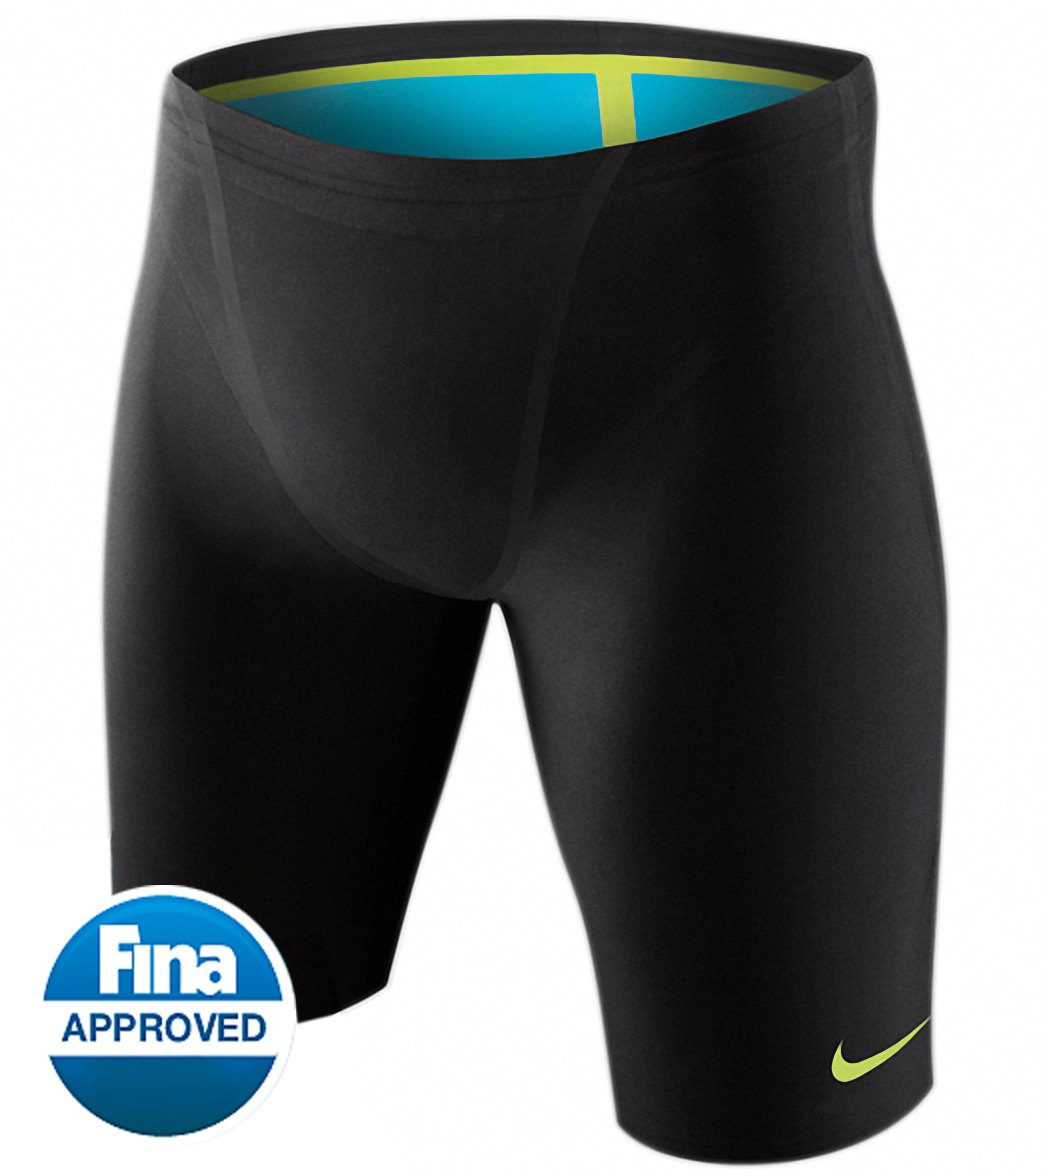 Nike Swim NG-1 Jammer Tech Suit Swimsuit at SwimOutlet.com - Free Shipping